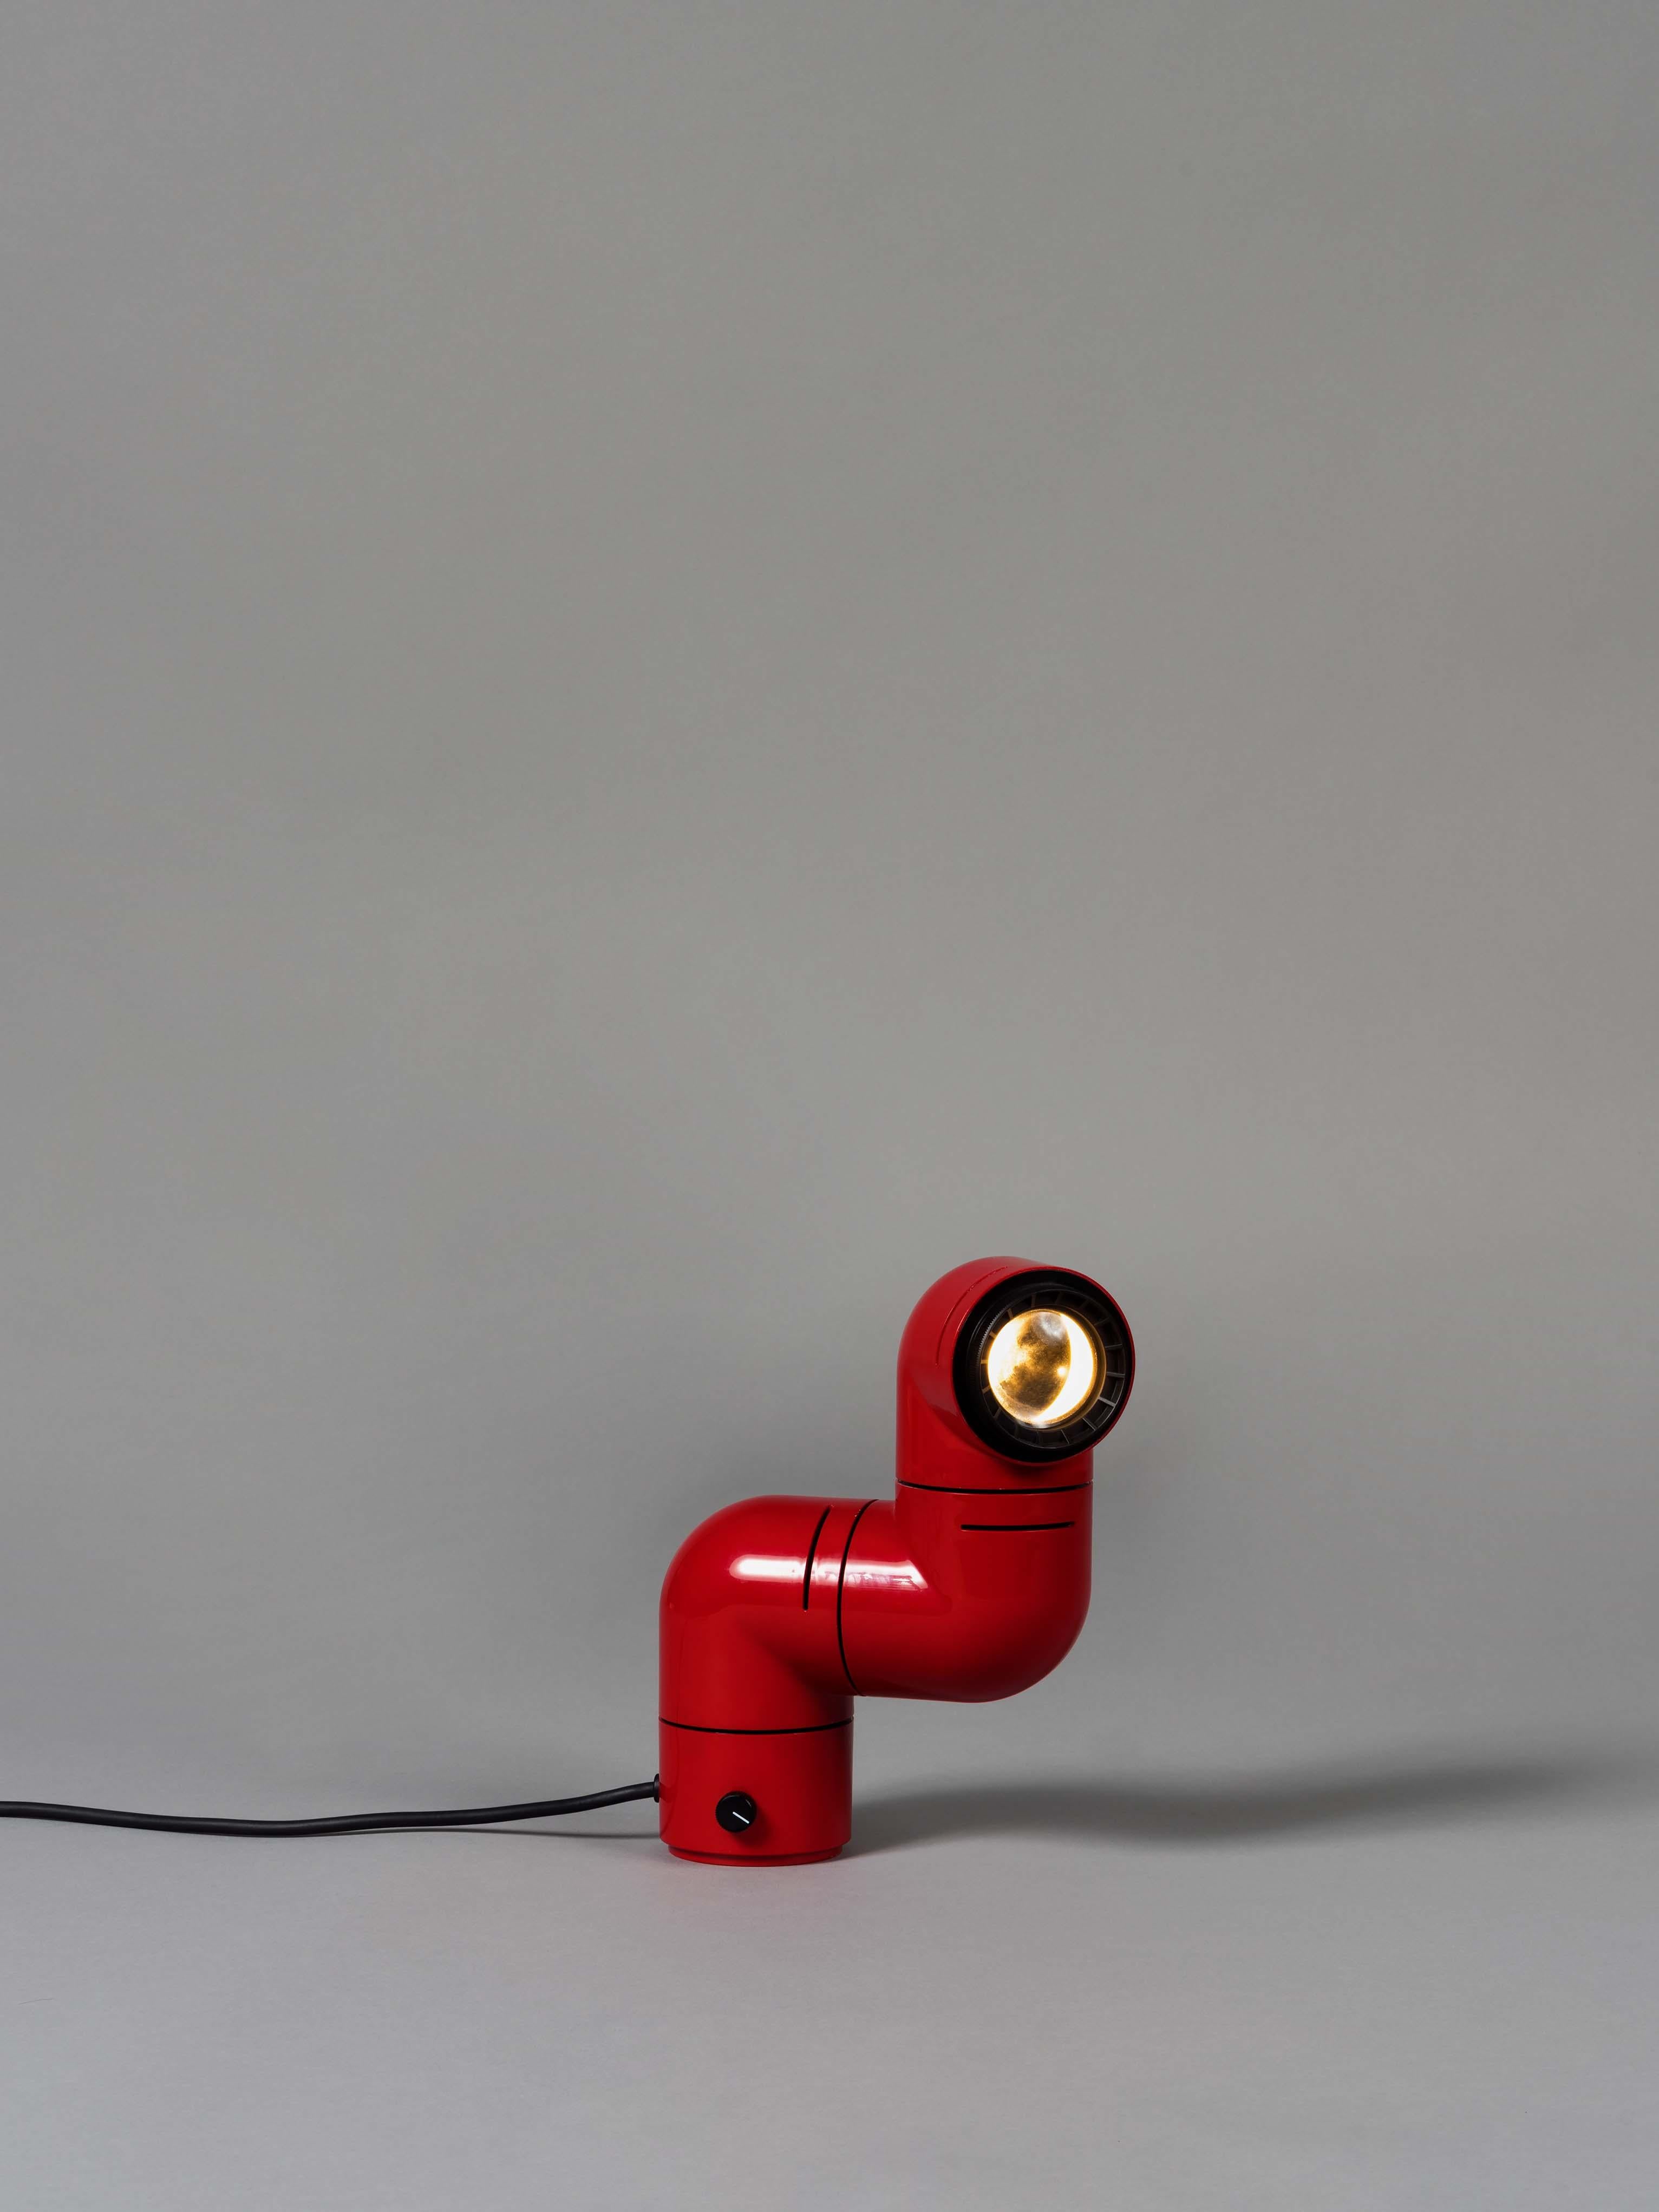 Red Tatu table/wall lamp by André Ricard
Dimensions: D 20.5 x W 8 x H 25 cm
Materials: ABS plastic.
Available in white or red.

Tatu is an object-lamp that has become memorable icon of Spanish pop culture of the 1970s. Incorporating LED